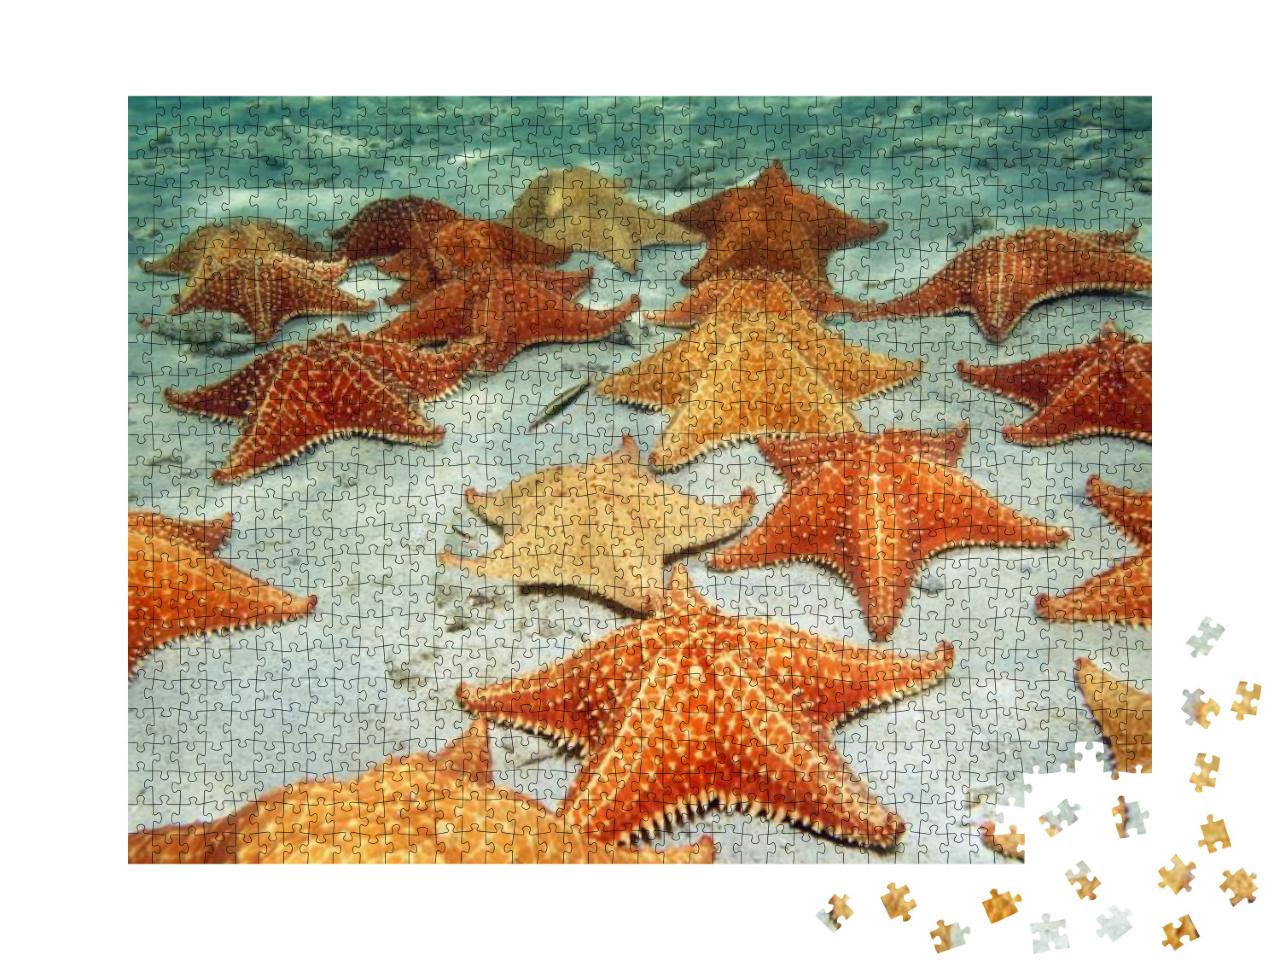 Many Cushion Starfish Underwater on a Sandy Ocean Floor... Jigsaw Puzzle with 1000 pieces